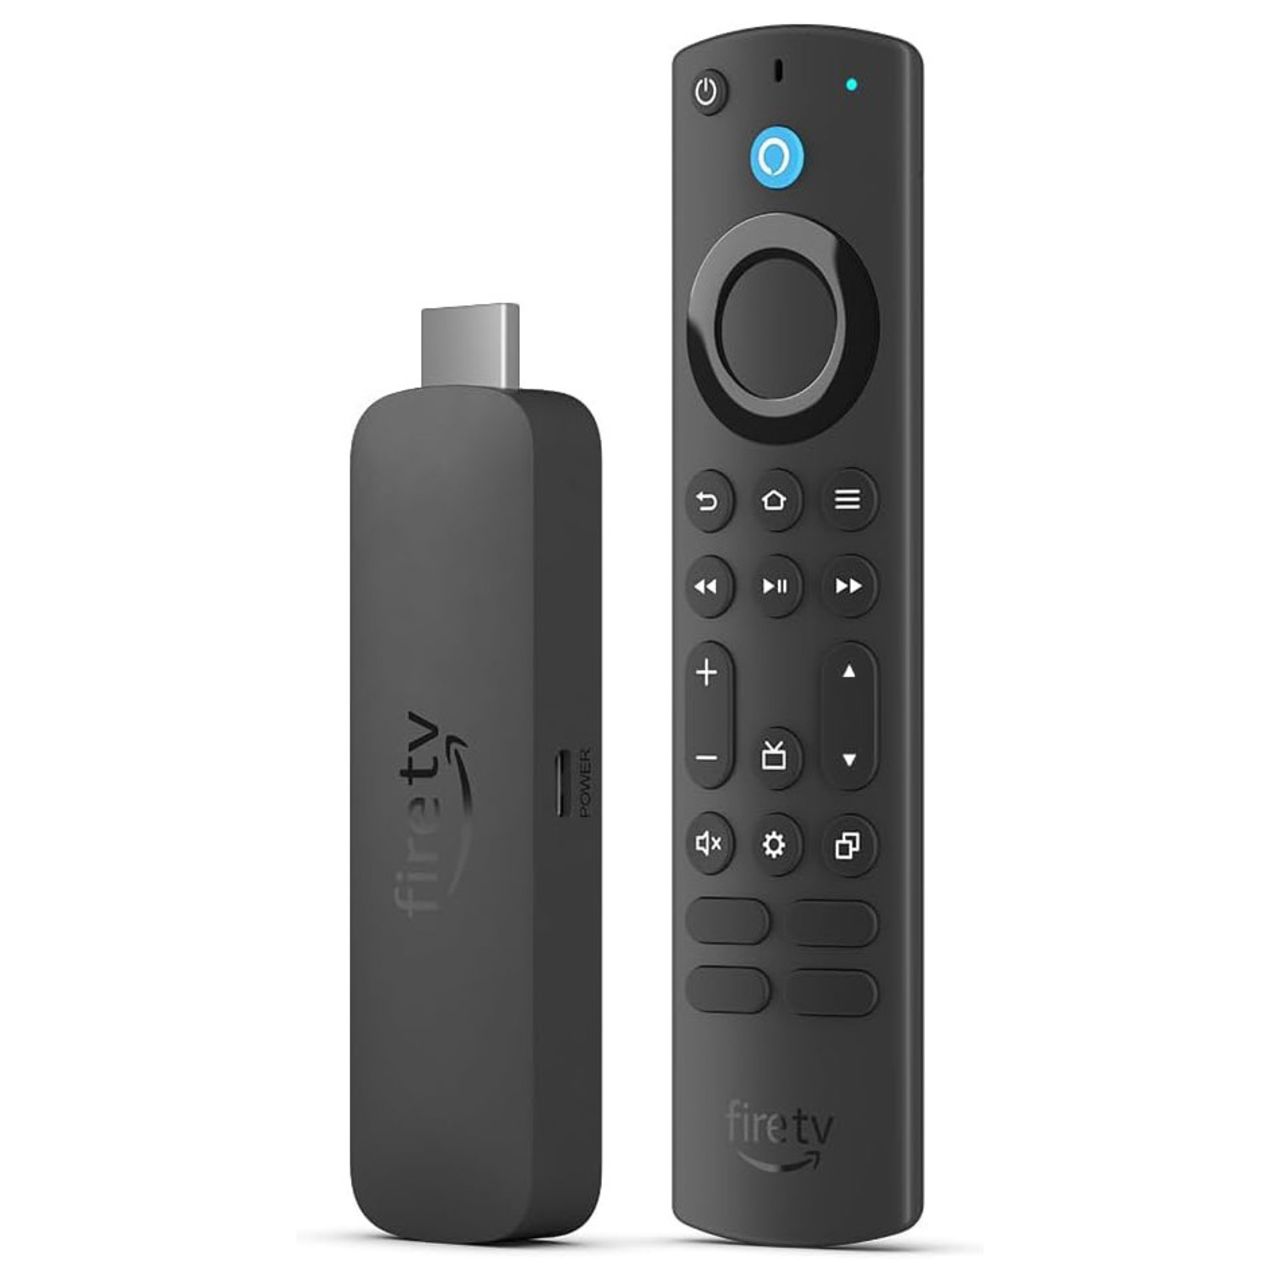 Adds Support for Watch Party on Fire TV Devices